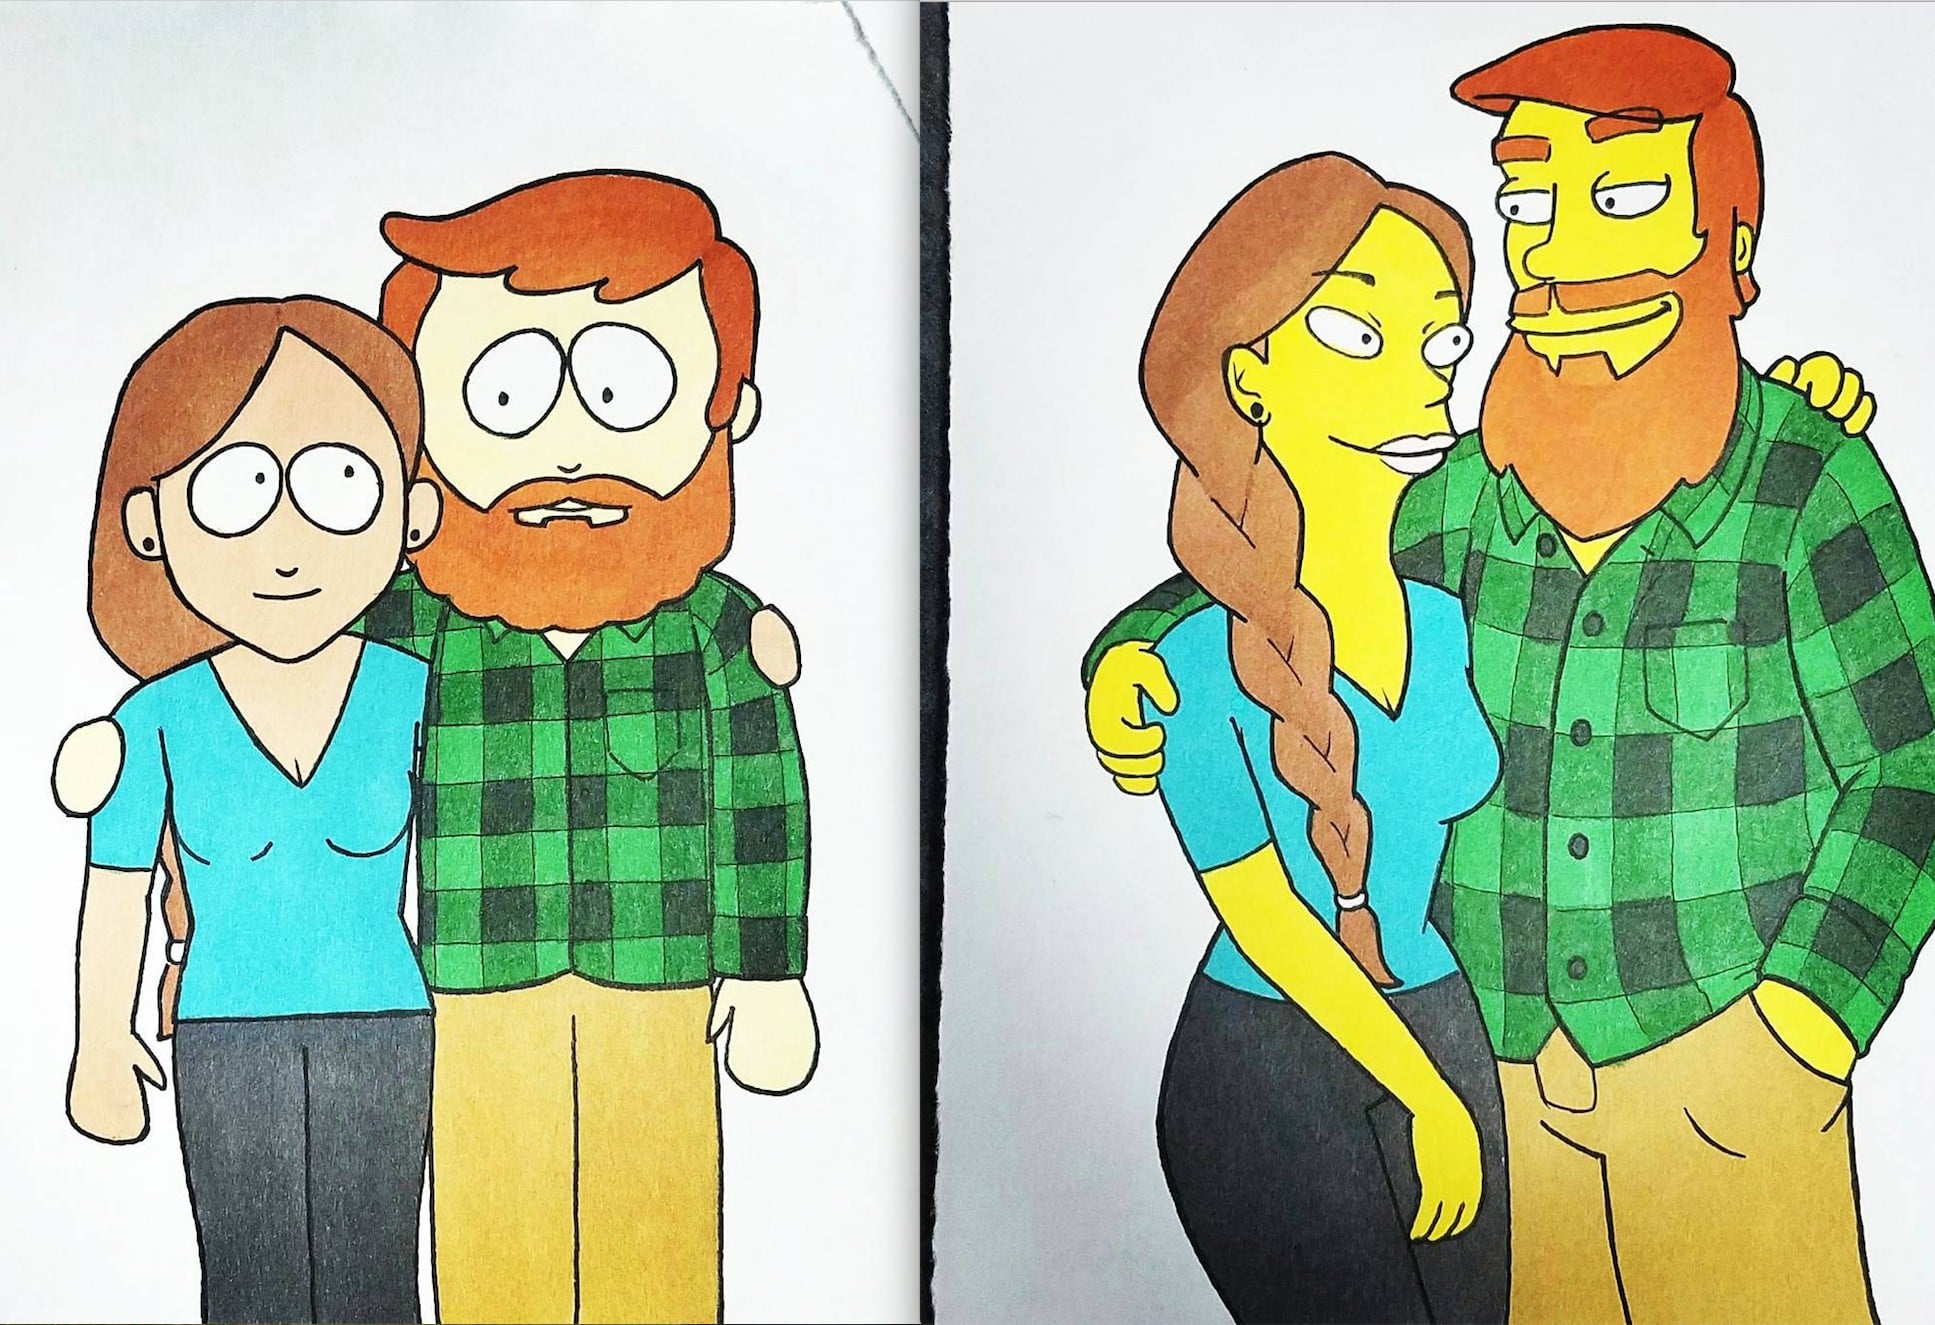 A Guy Drew Himself and His Girlfriend in 10 Famous Cartoon Styles